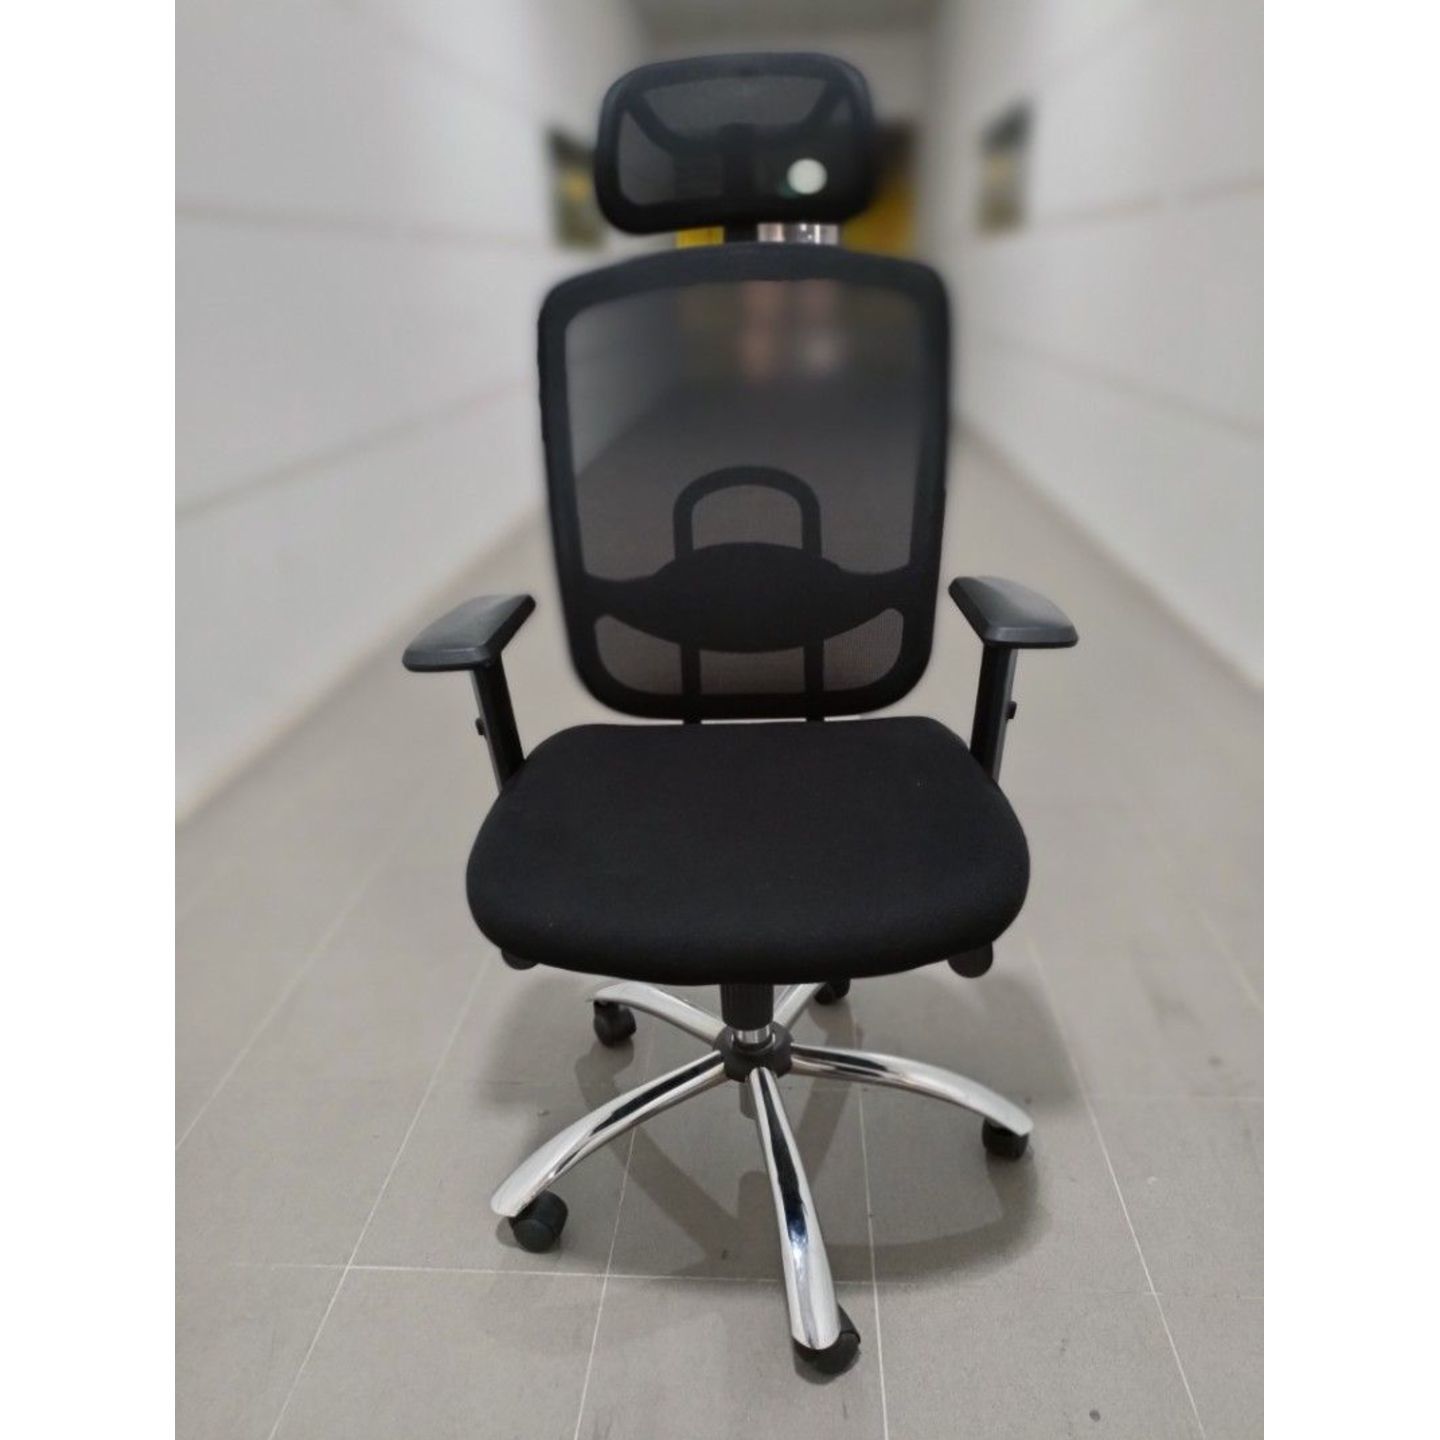 STASION Executive Office Chair in BLACK